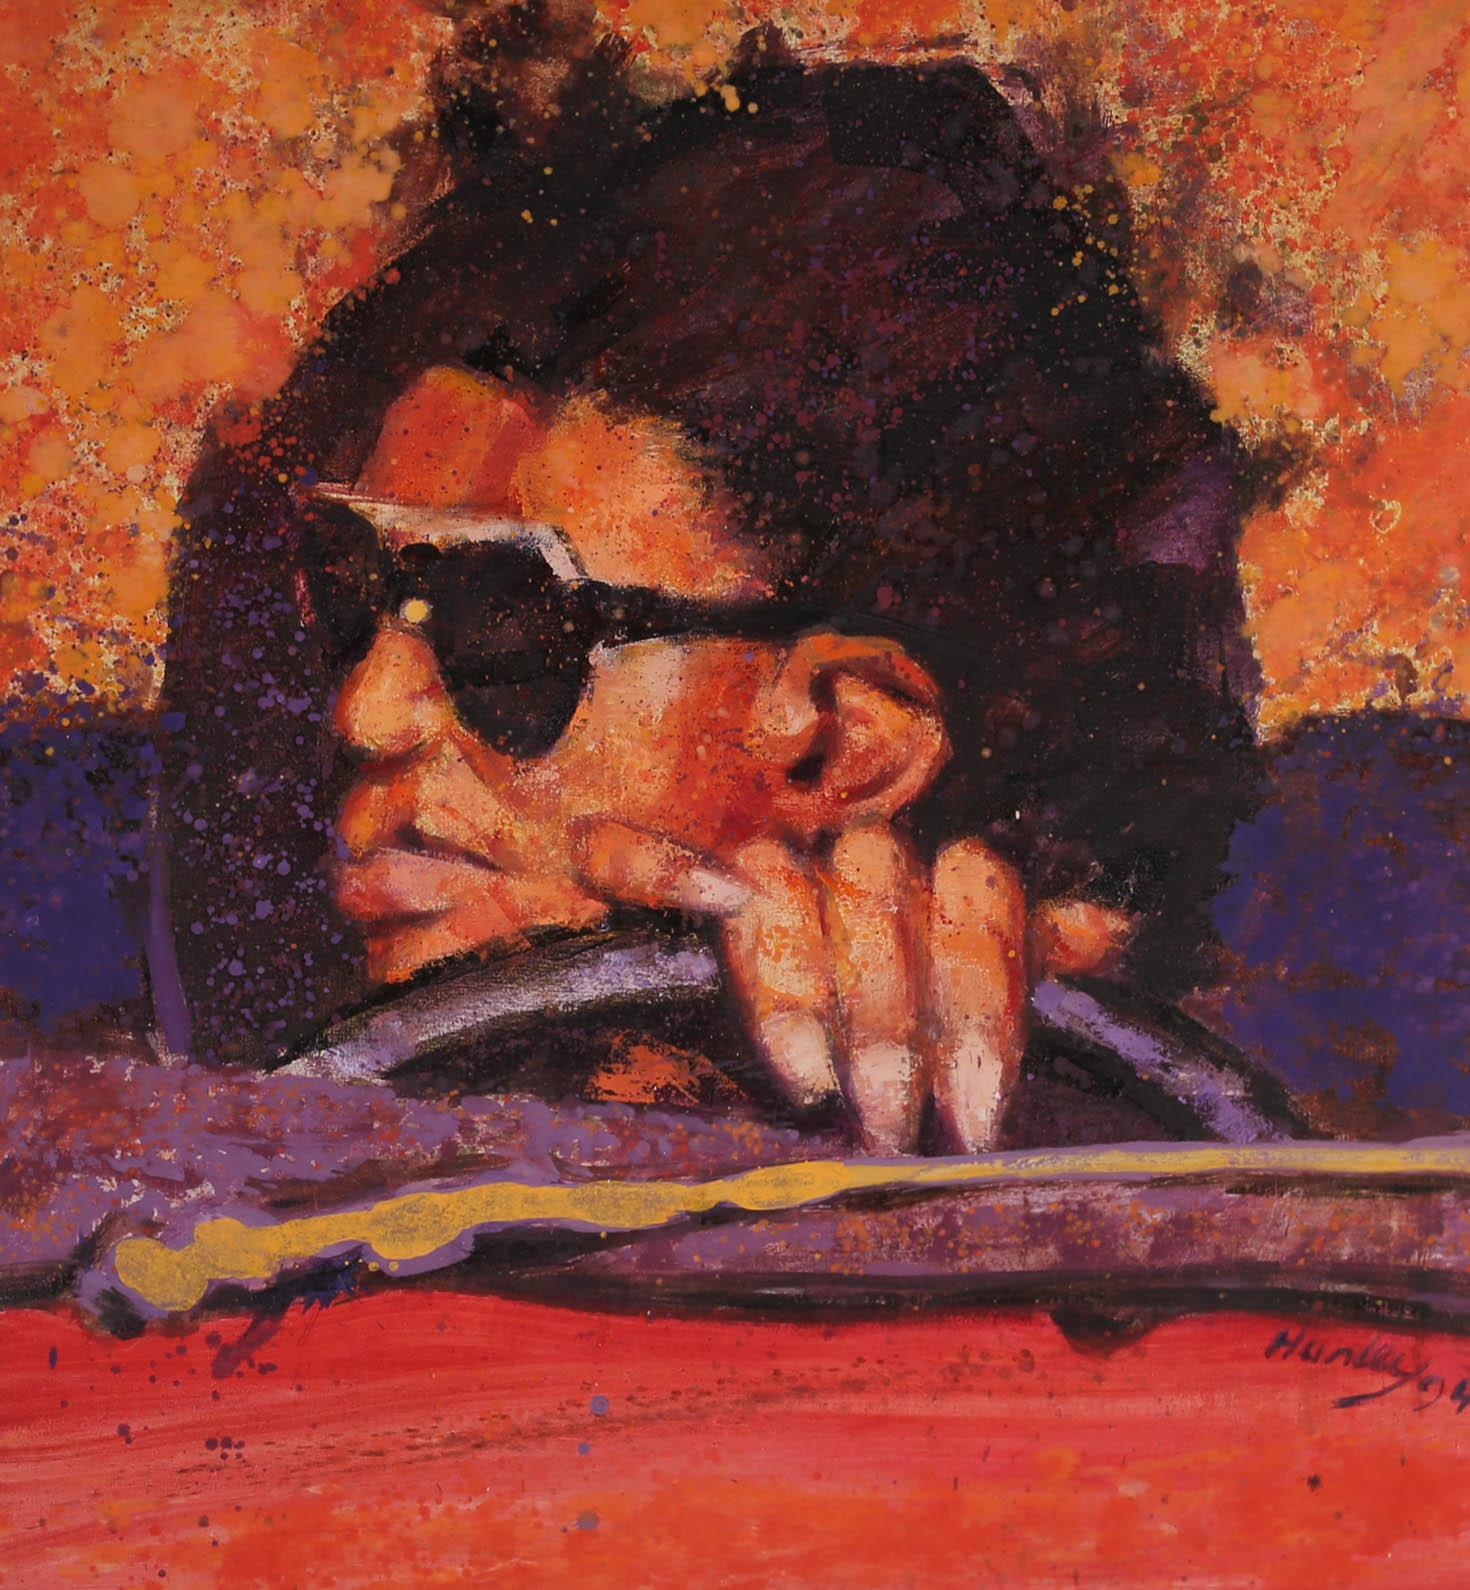 A striking portrait depicting a person sitting in the driver's seat of a car. The artist captures the scene in vibrant shades of red and purple using expressive brushwork convey movement in the scene. Signed and dated to the lower right. Tilted to